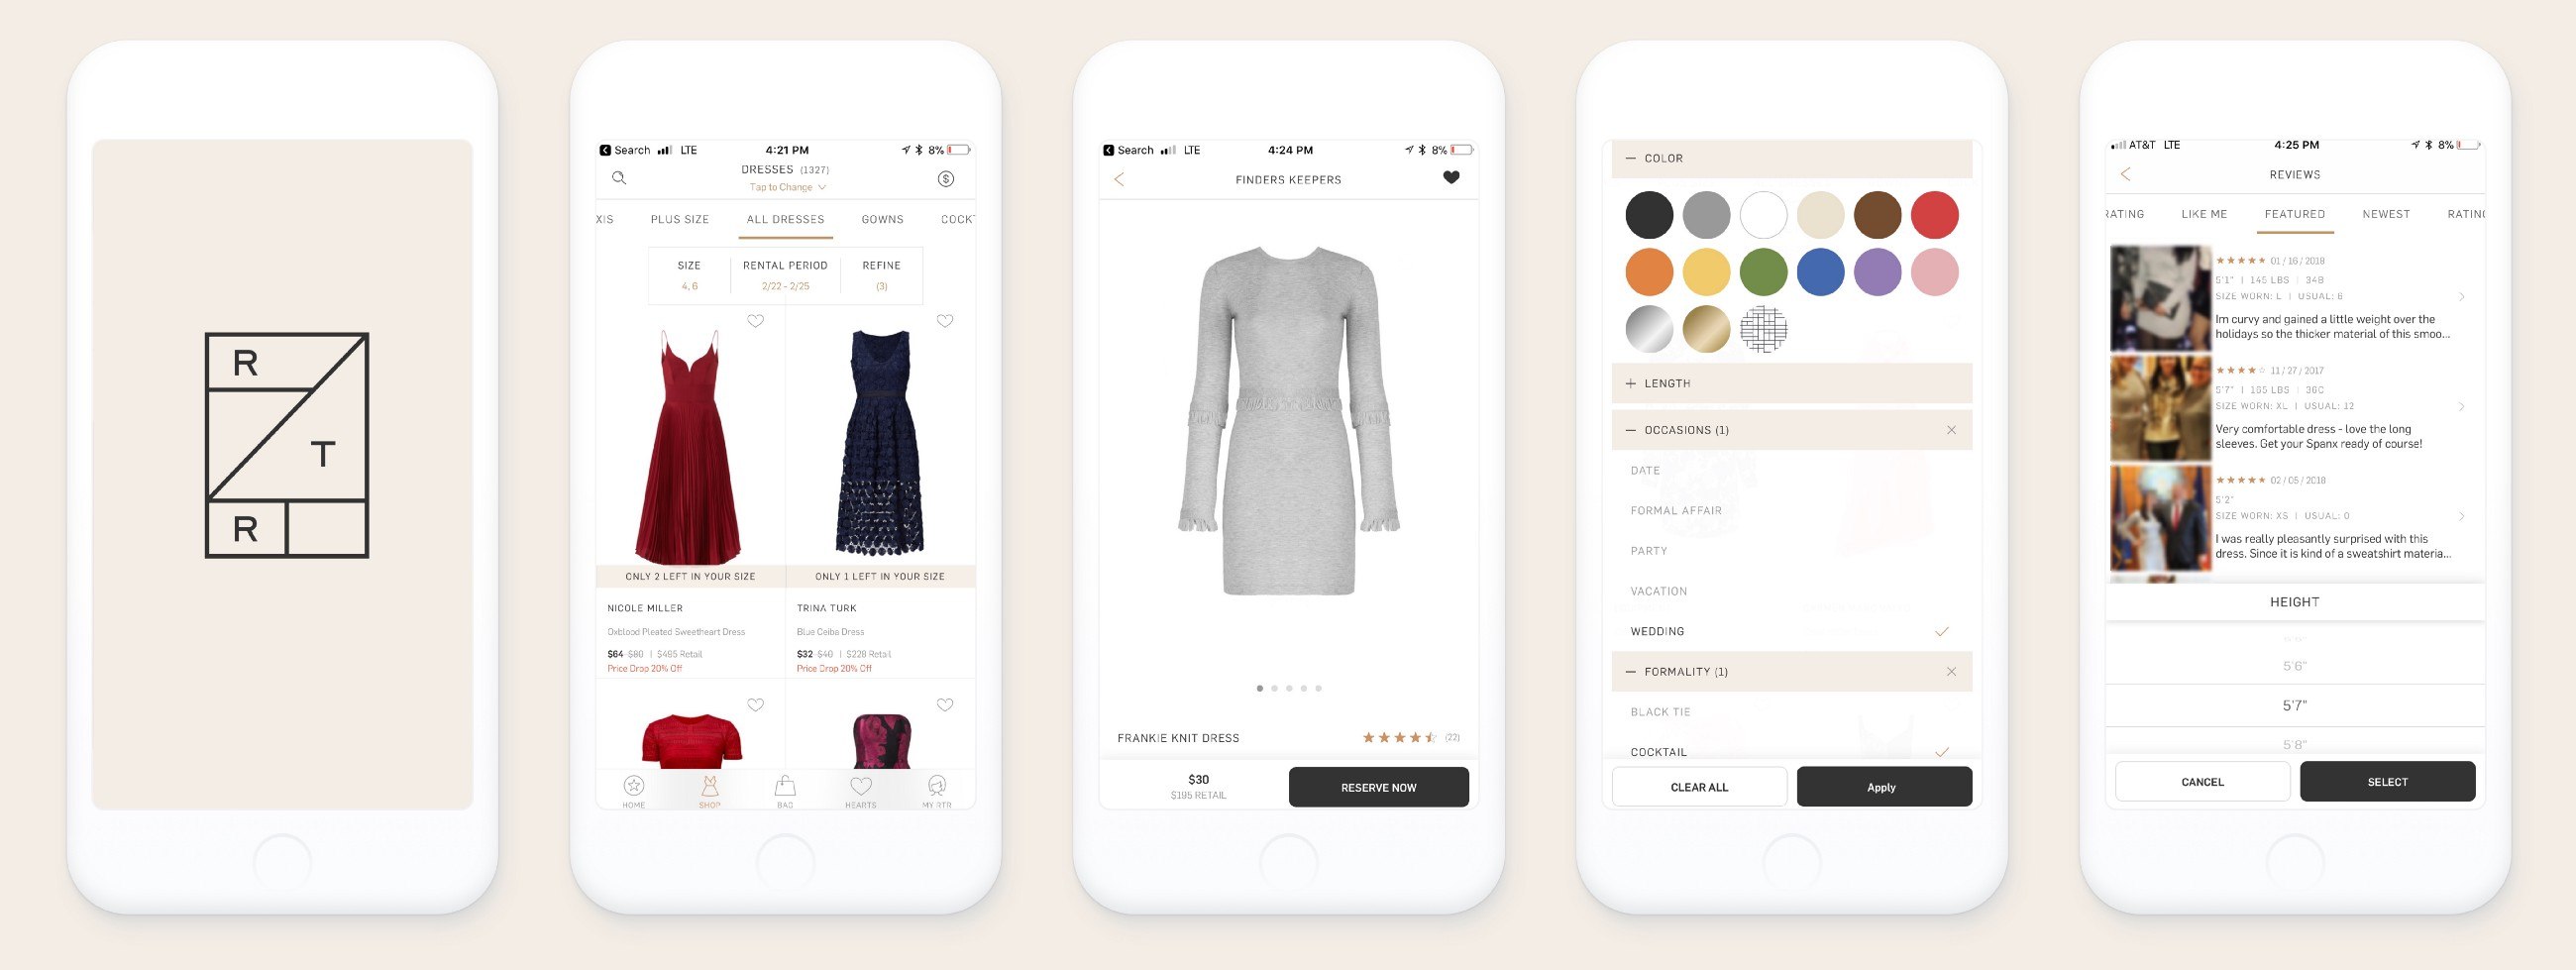 How Rent the Runway Boosted Talent, Sustainability and CX by Moving to the  Cloud - Retail TouchPoints